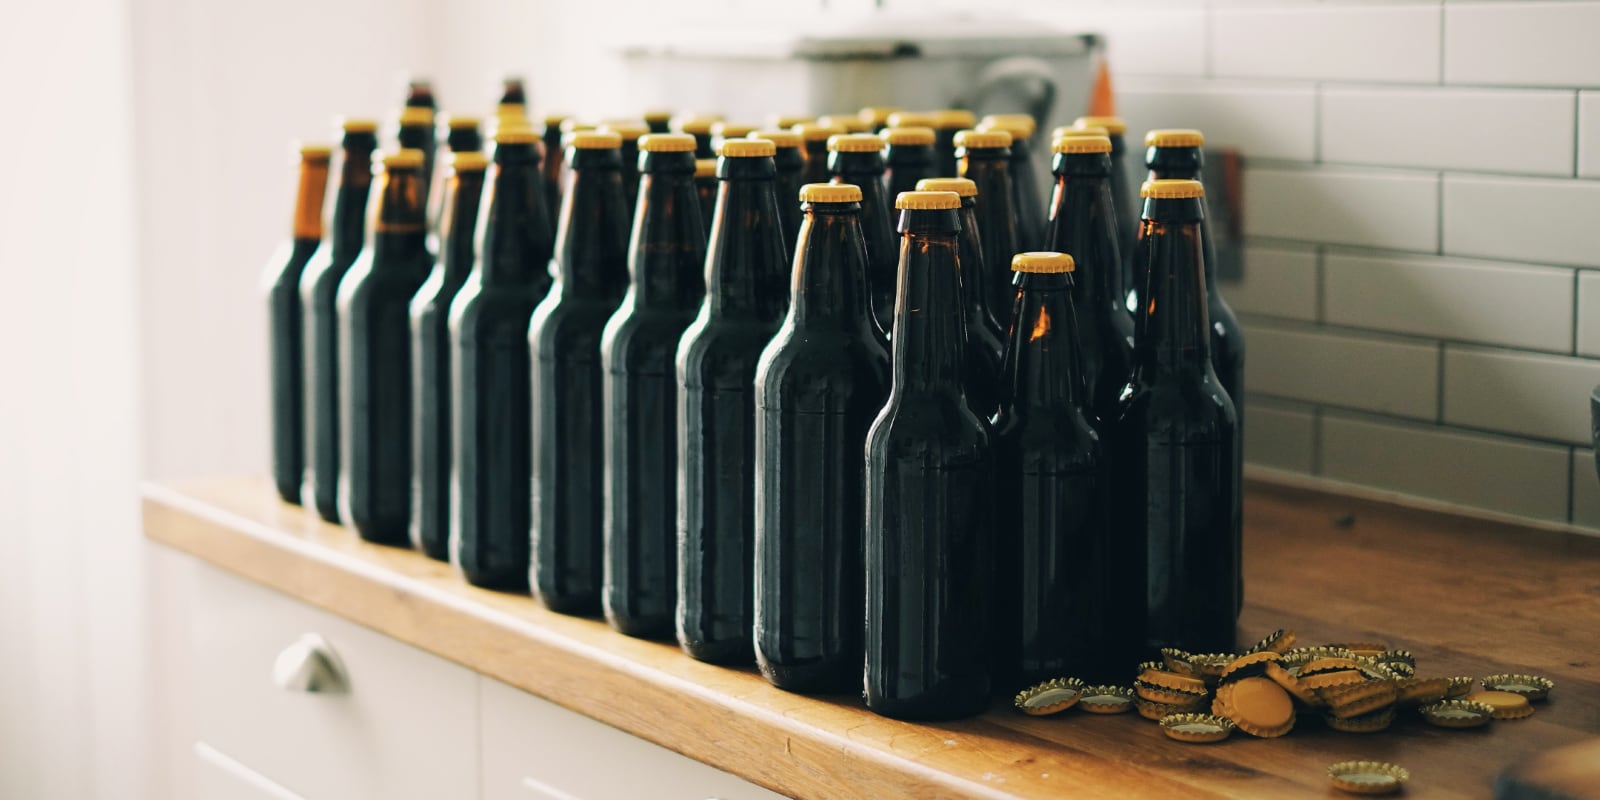 How to Get Started Brewing Your Own Beer